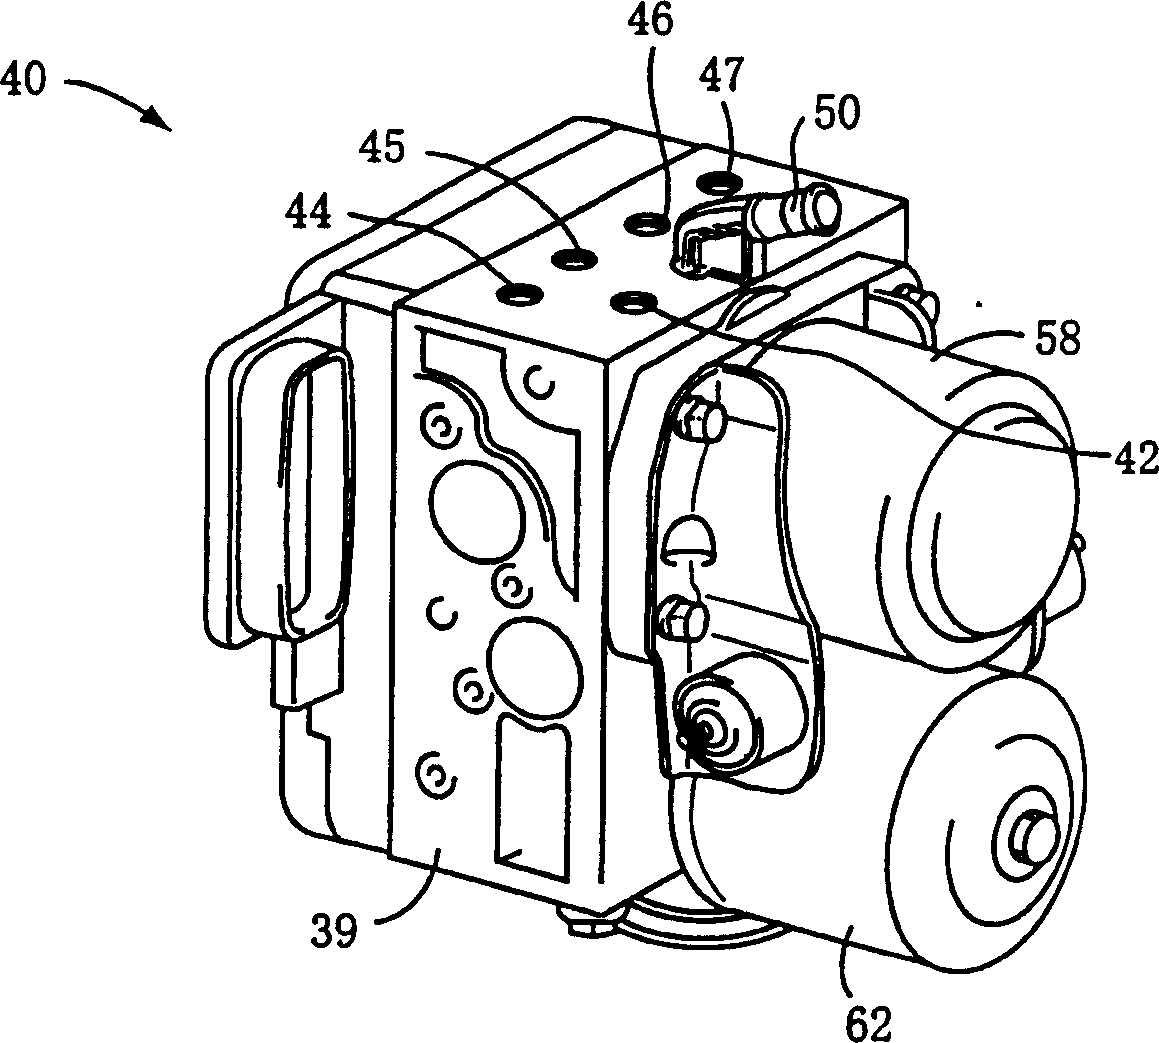 Electronically controlled hydraulic brake system